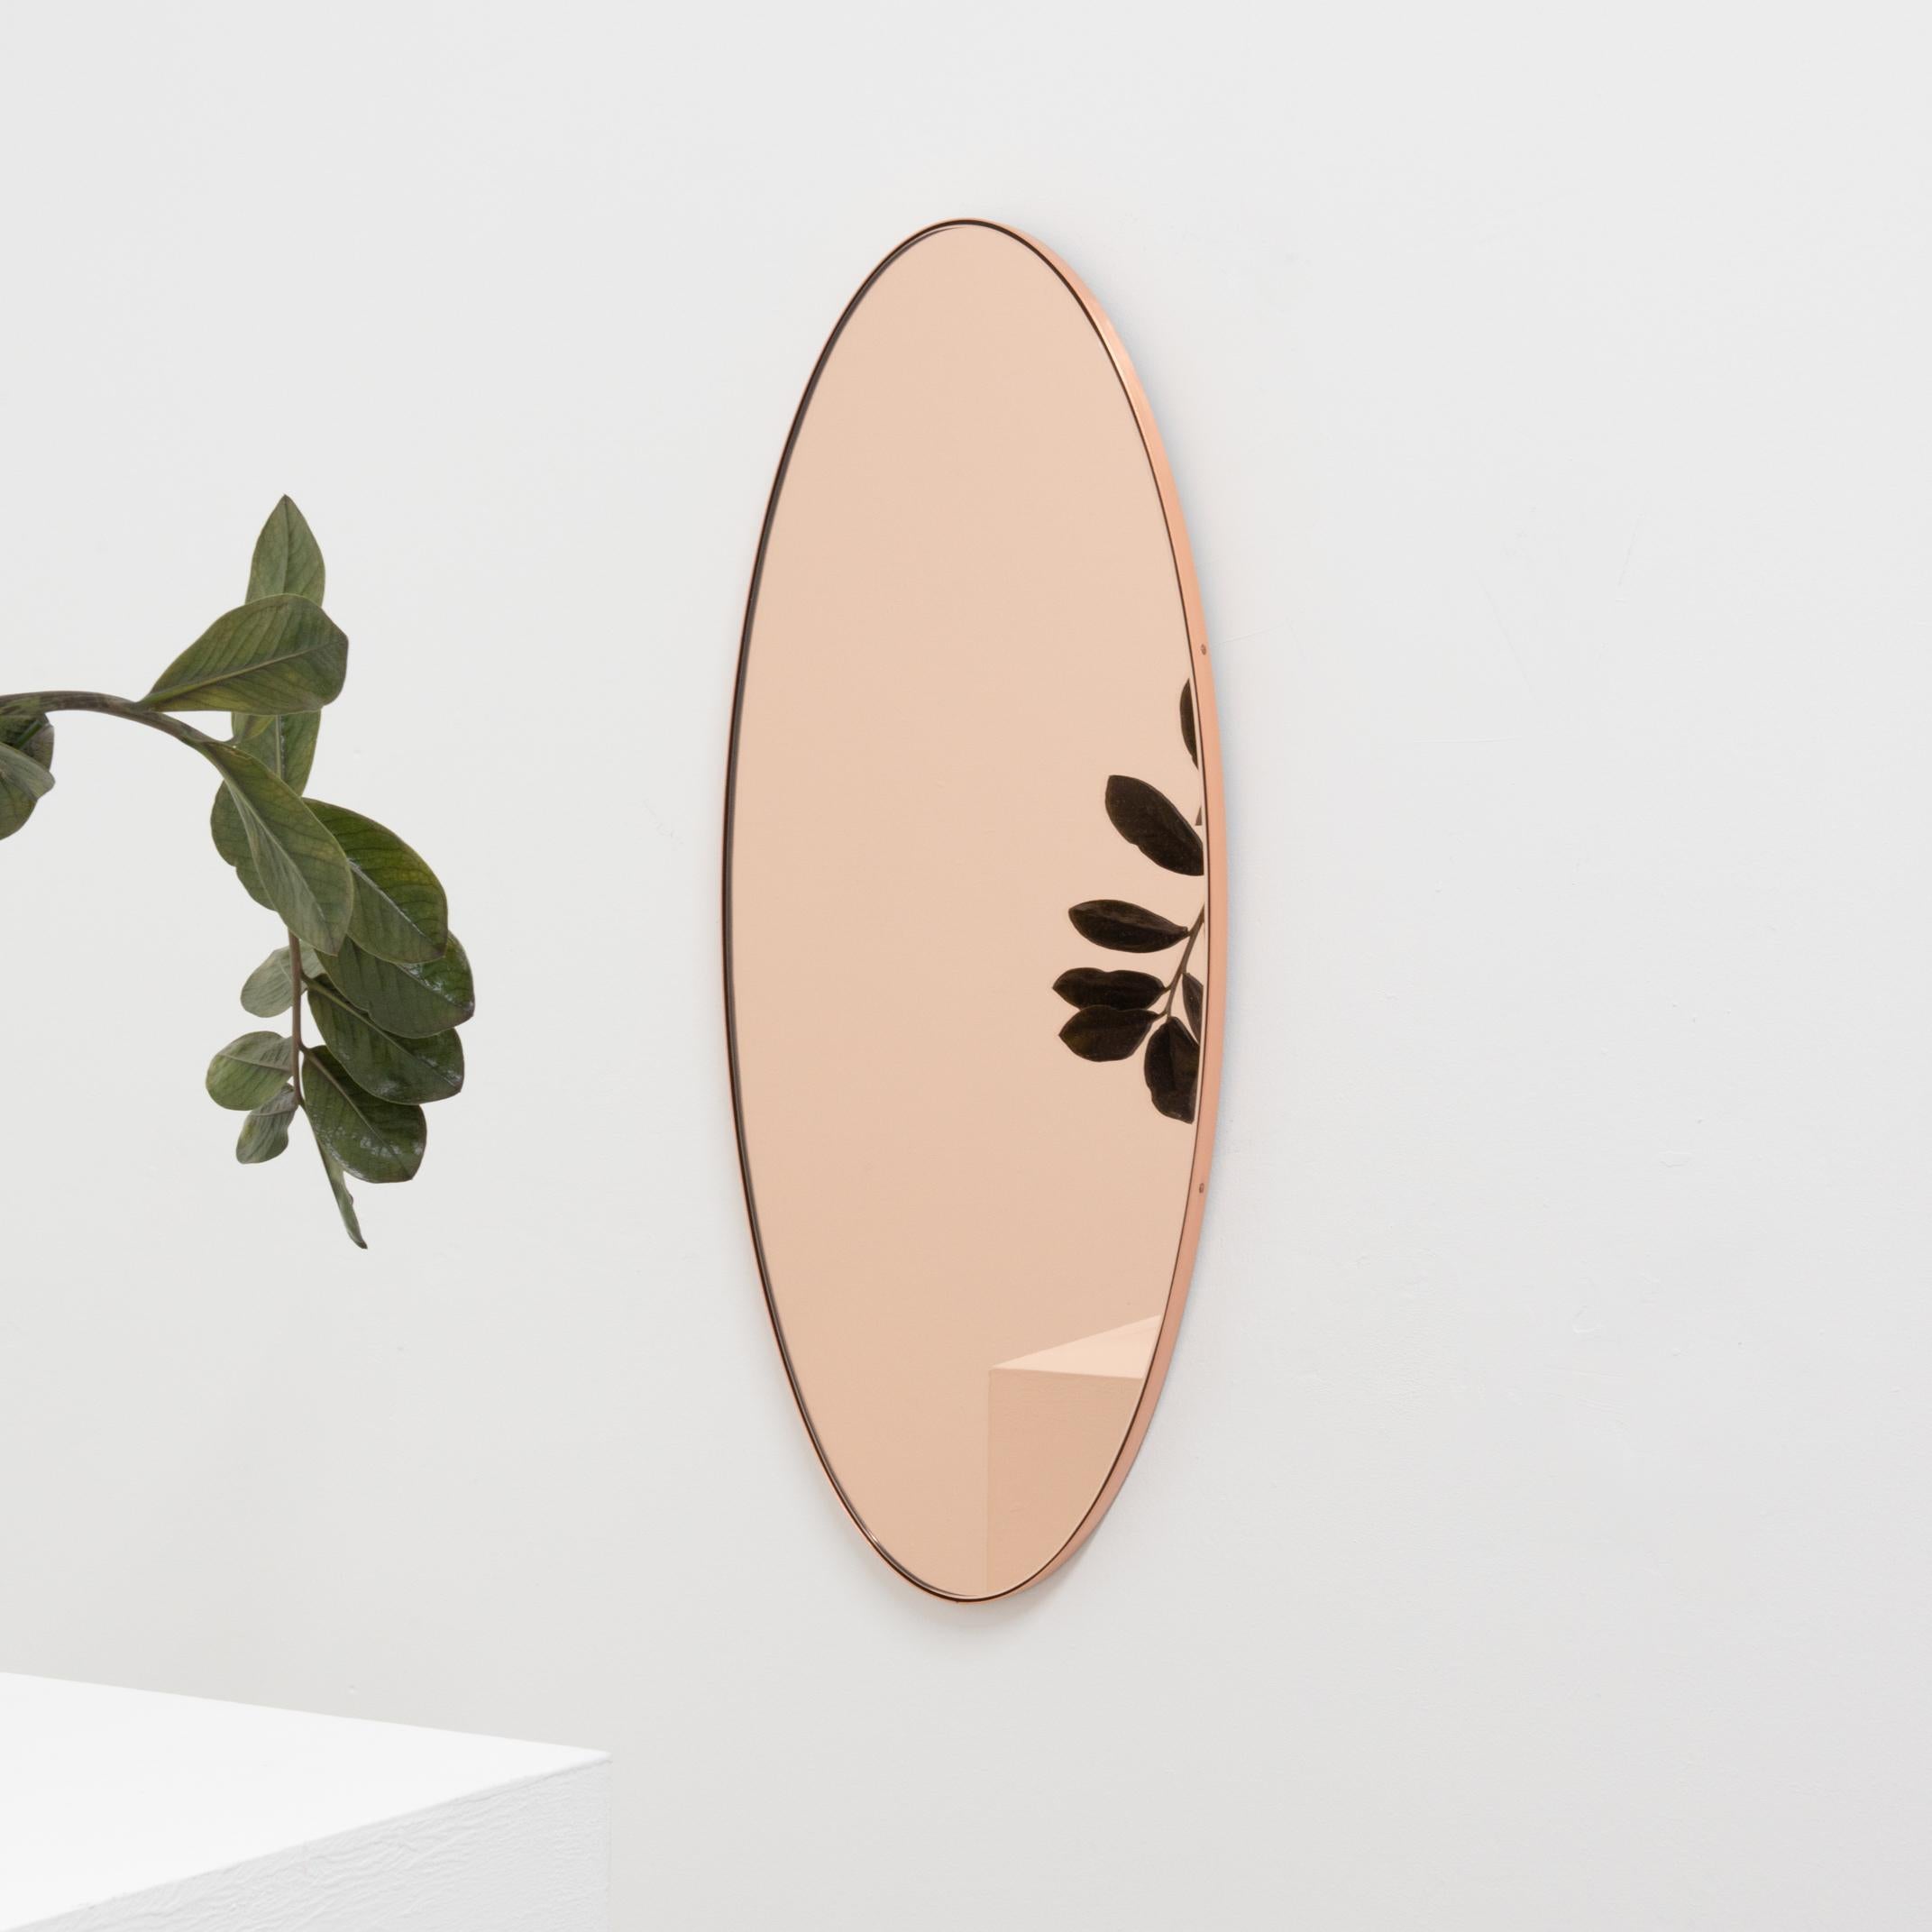 Ovalis Oval shaped Rose Gold Contemporary Mirror with a Copper Frame, Small For Sale 3